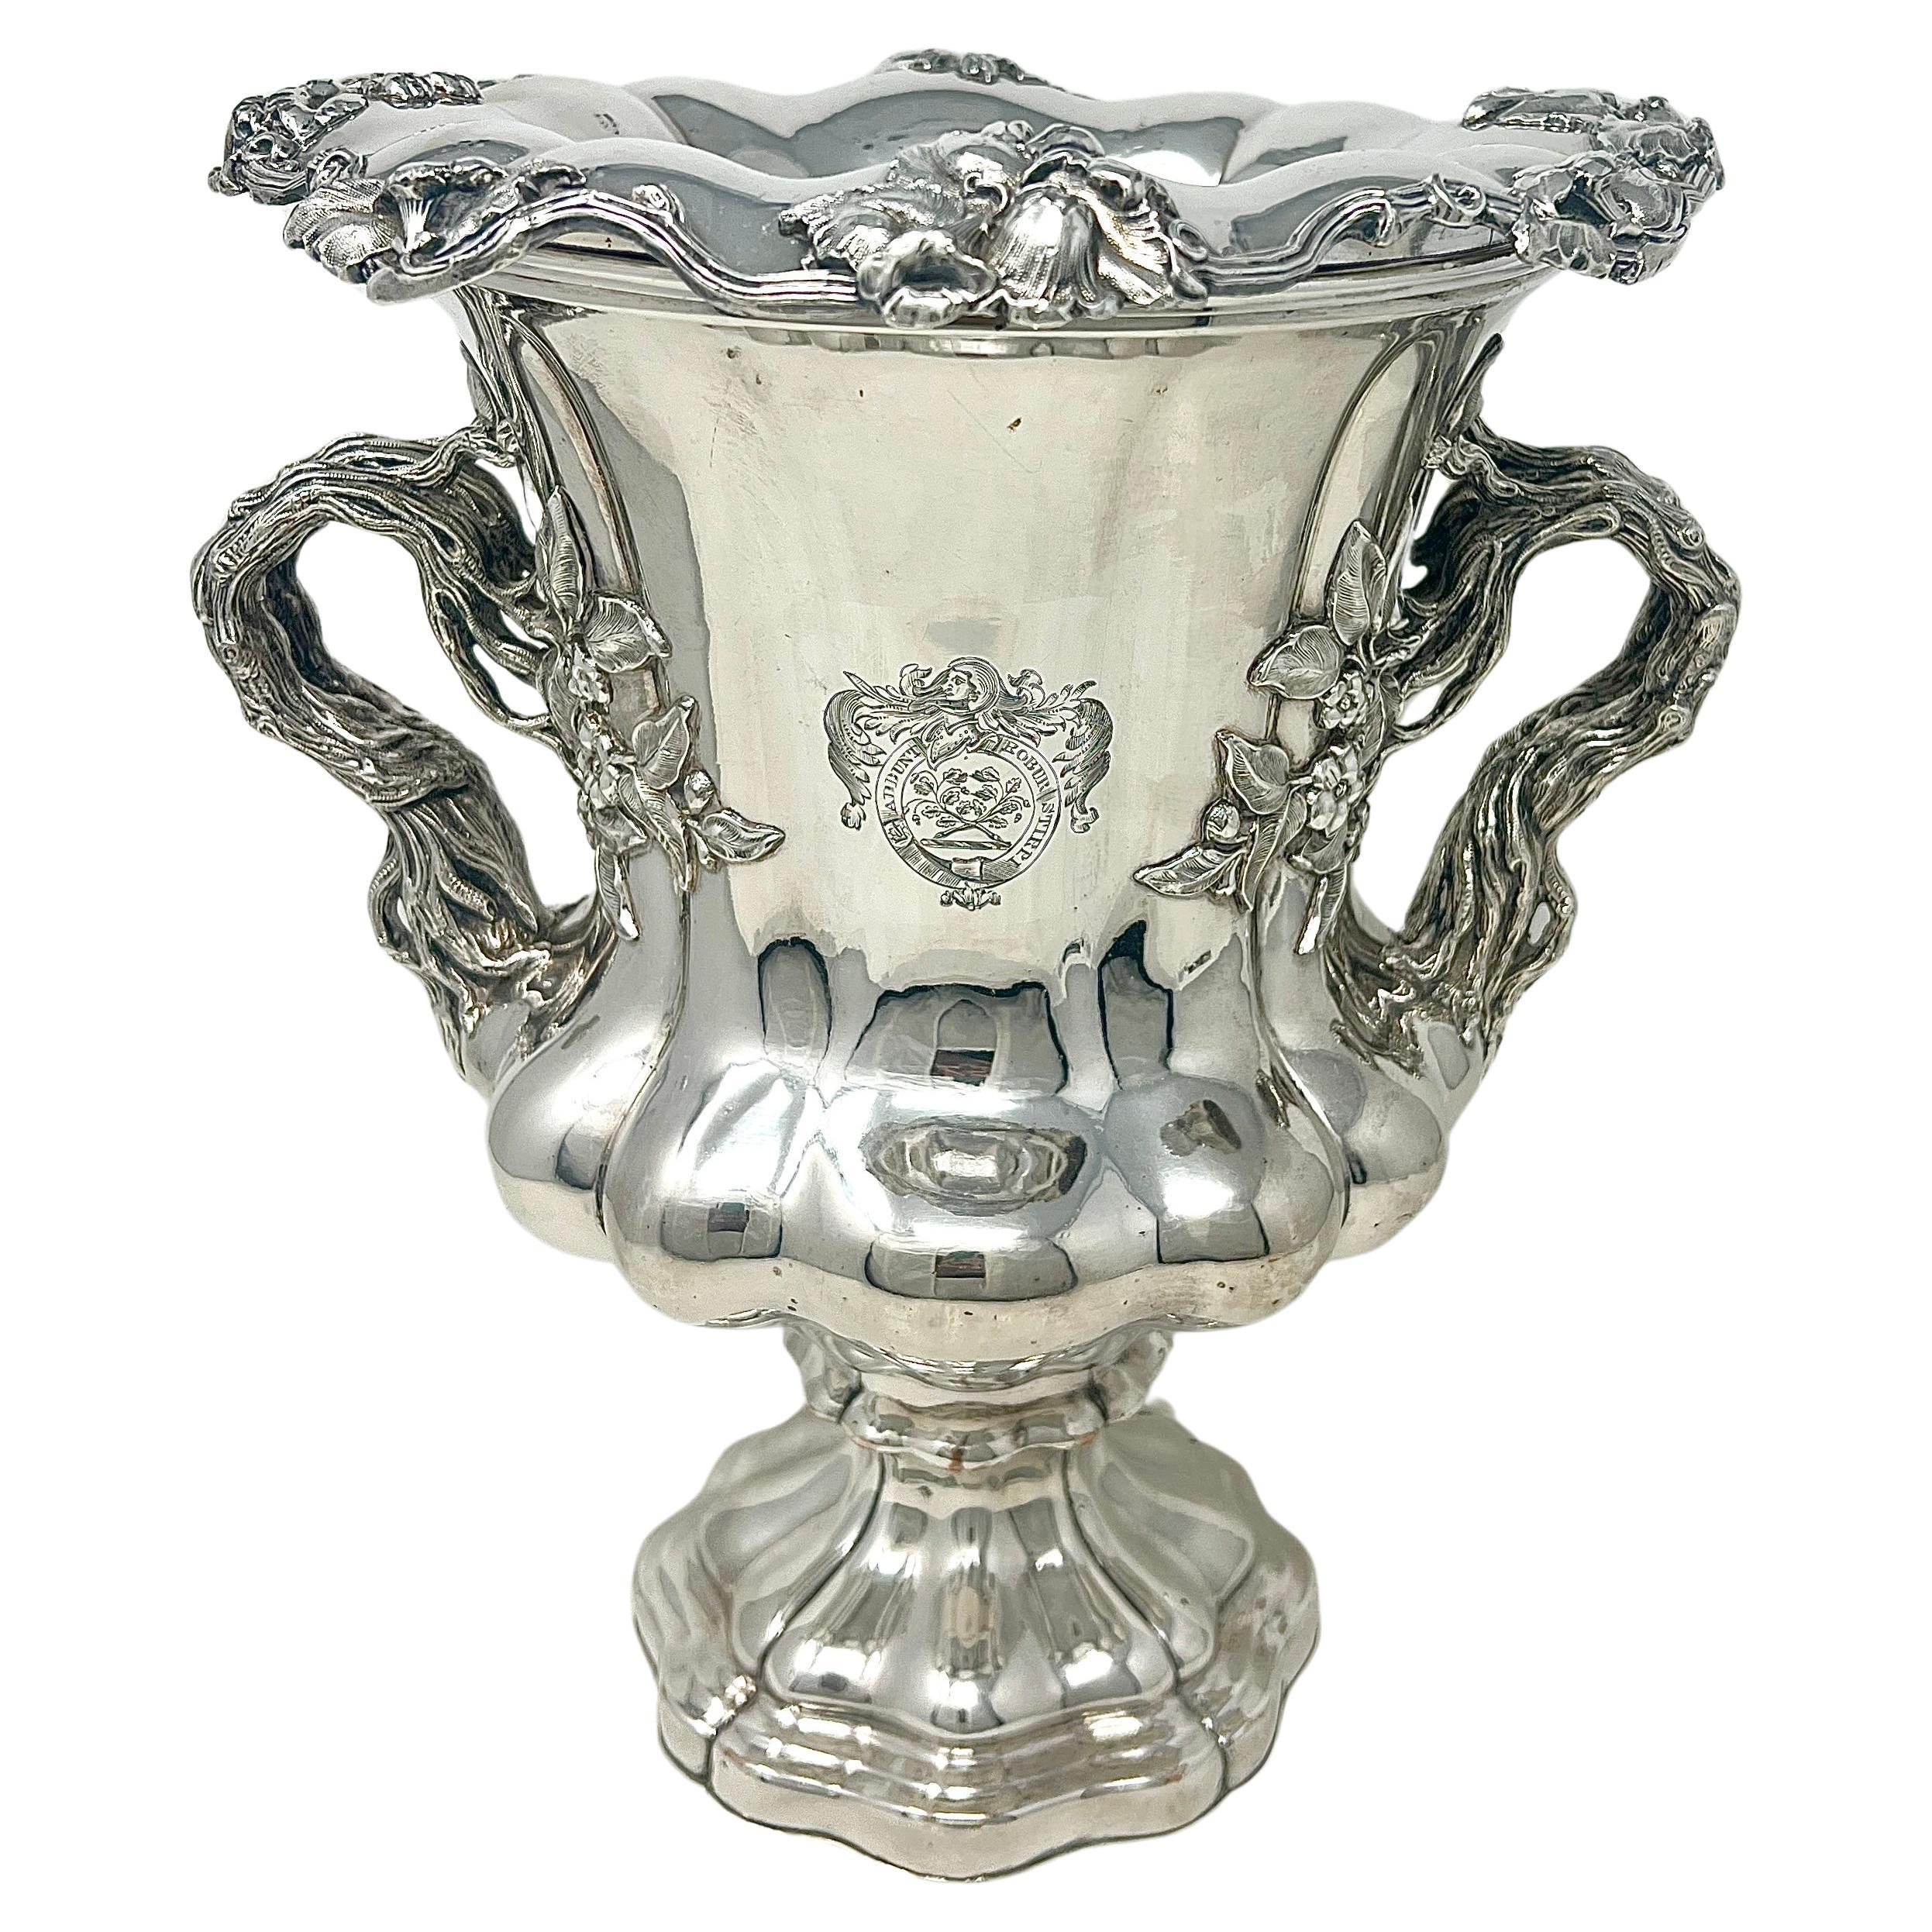 Antique English Silver Plated Champagne Bucket, Circa 1890-1900. For Sale